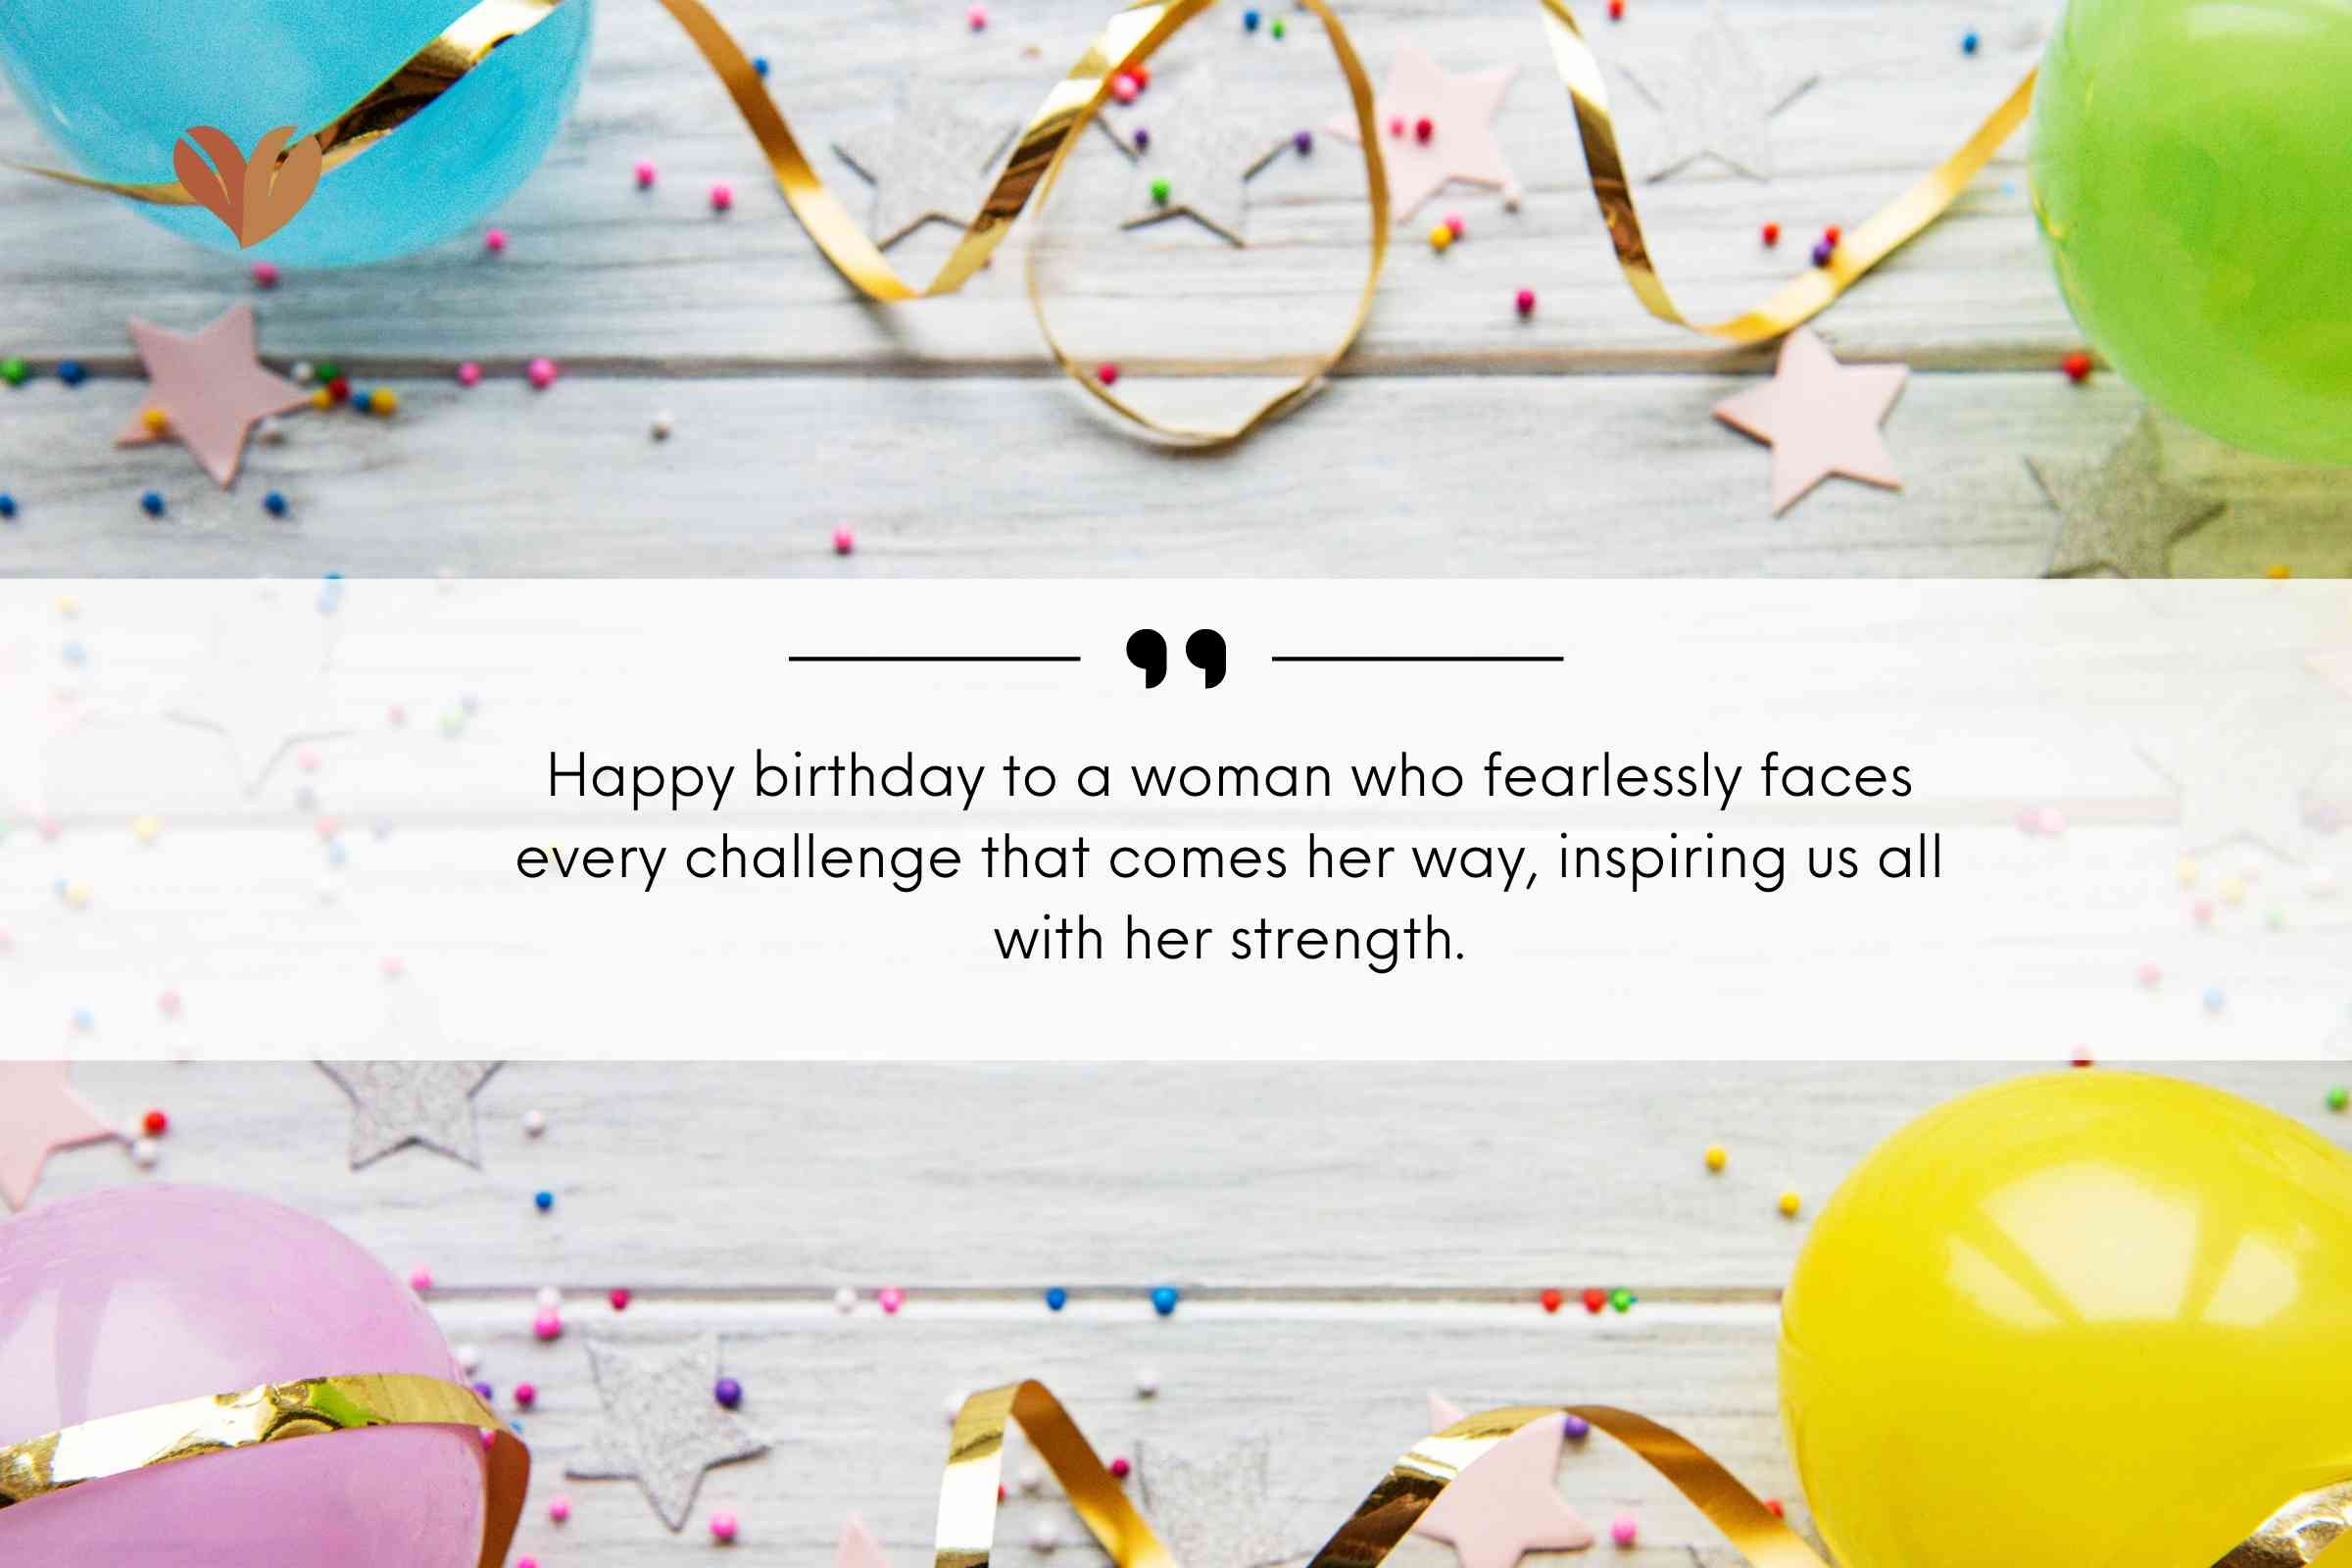 Quotes for Happy Birthday to an Amazing Woman